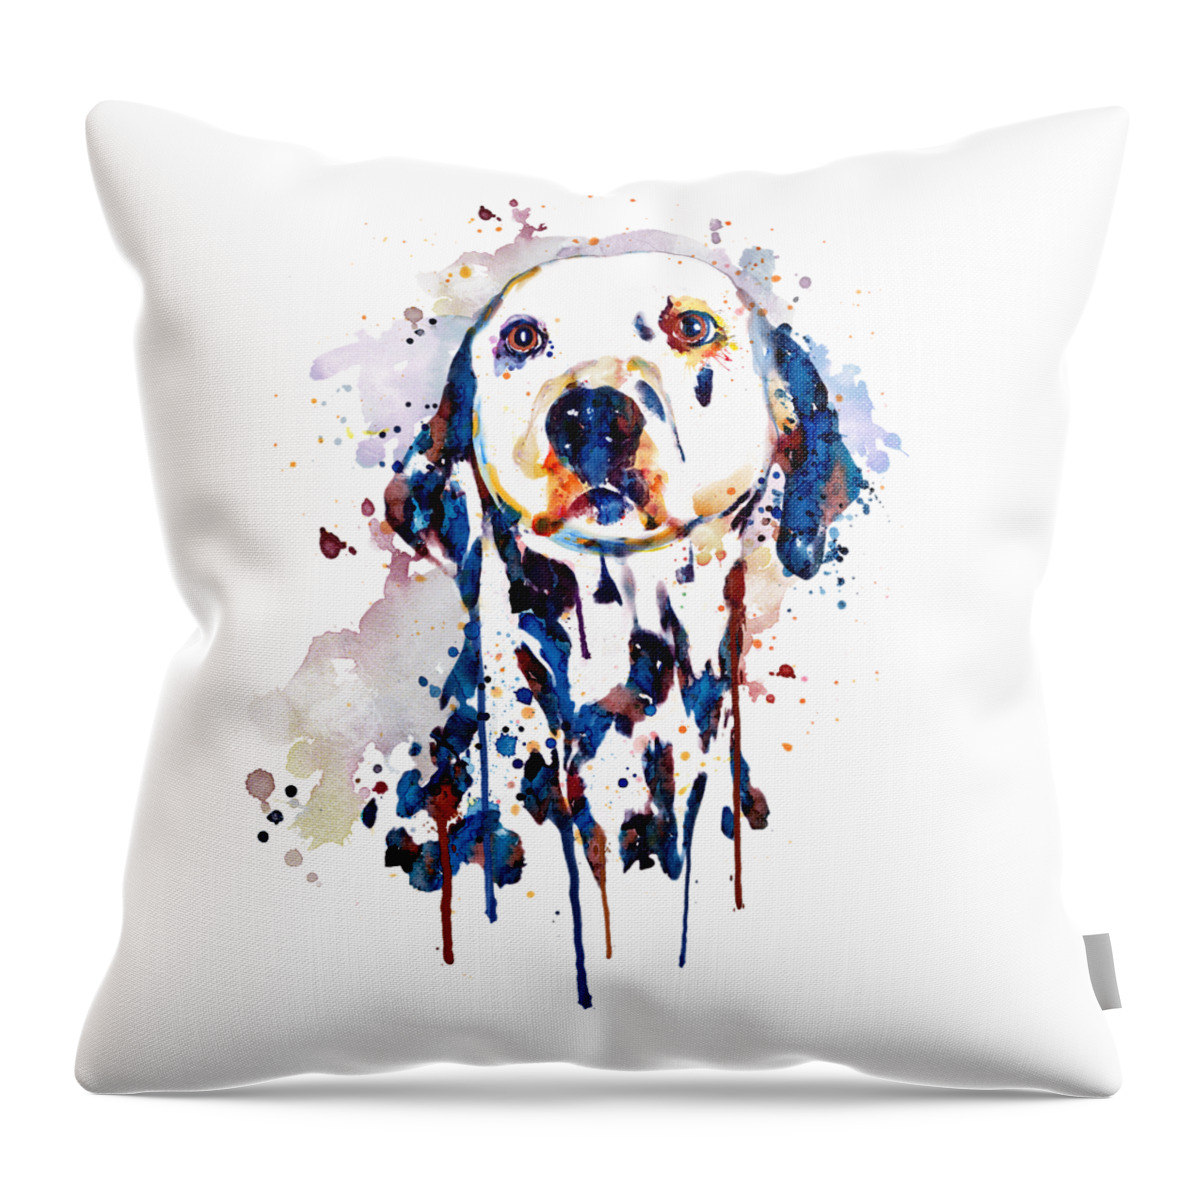 Marian Voicu Throw Pillow featuring the painting Dalmatian Head by Marian Voicu